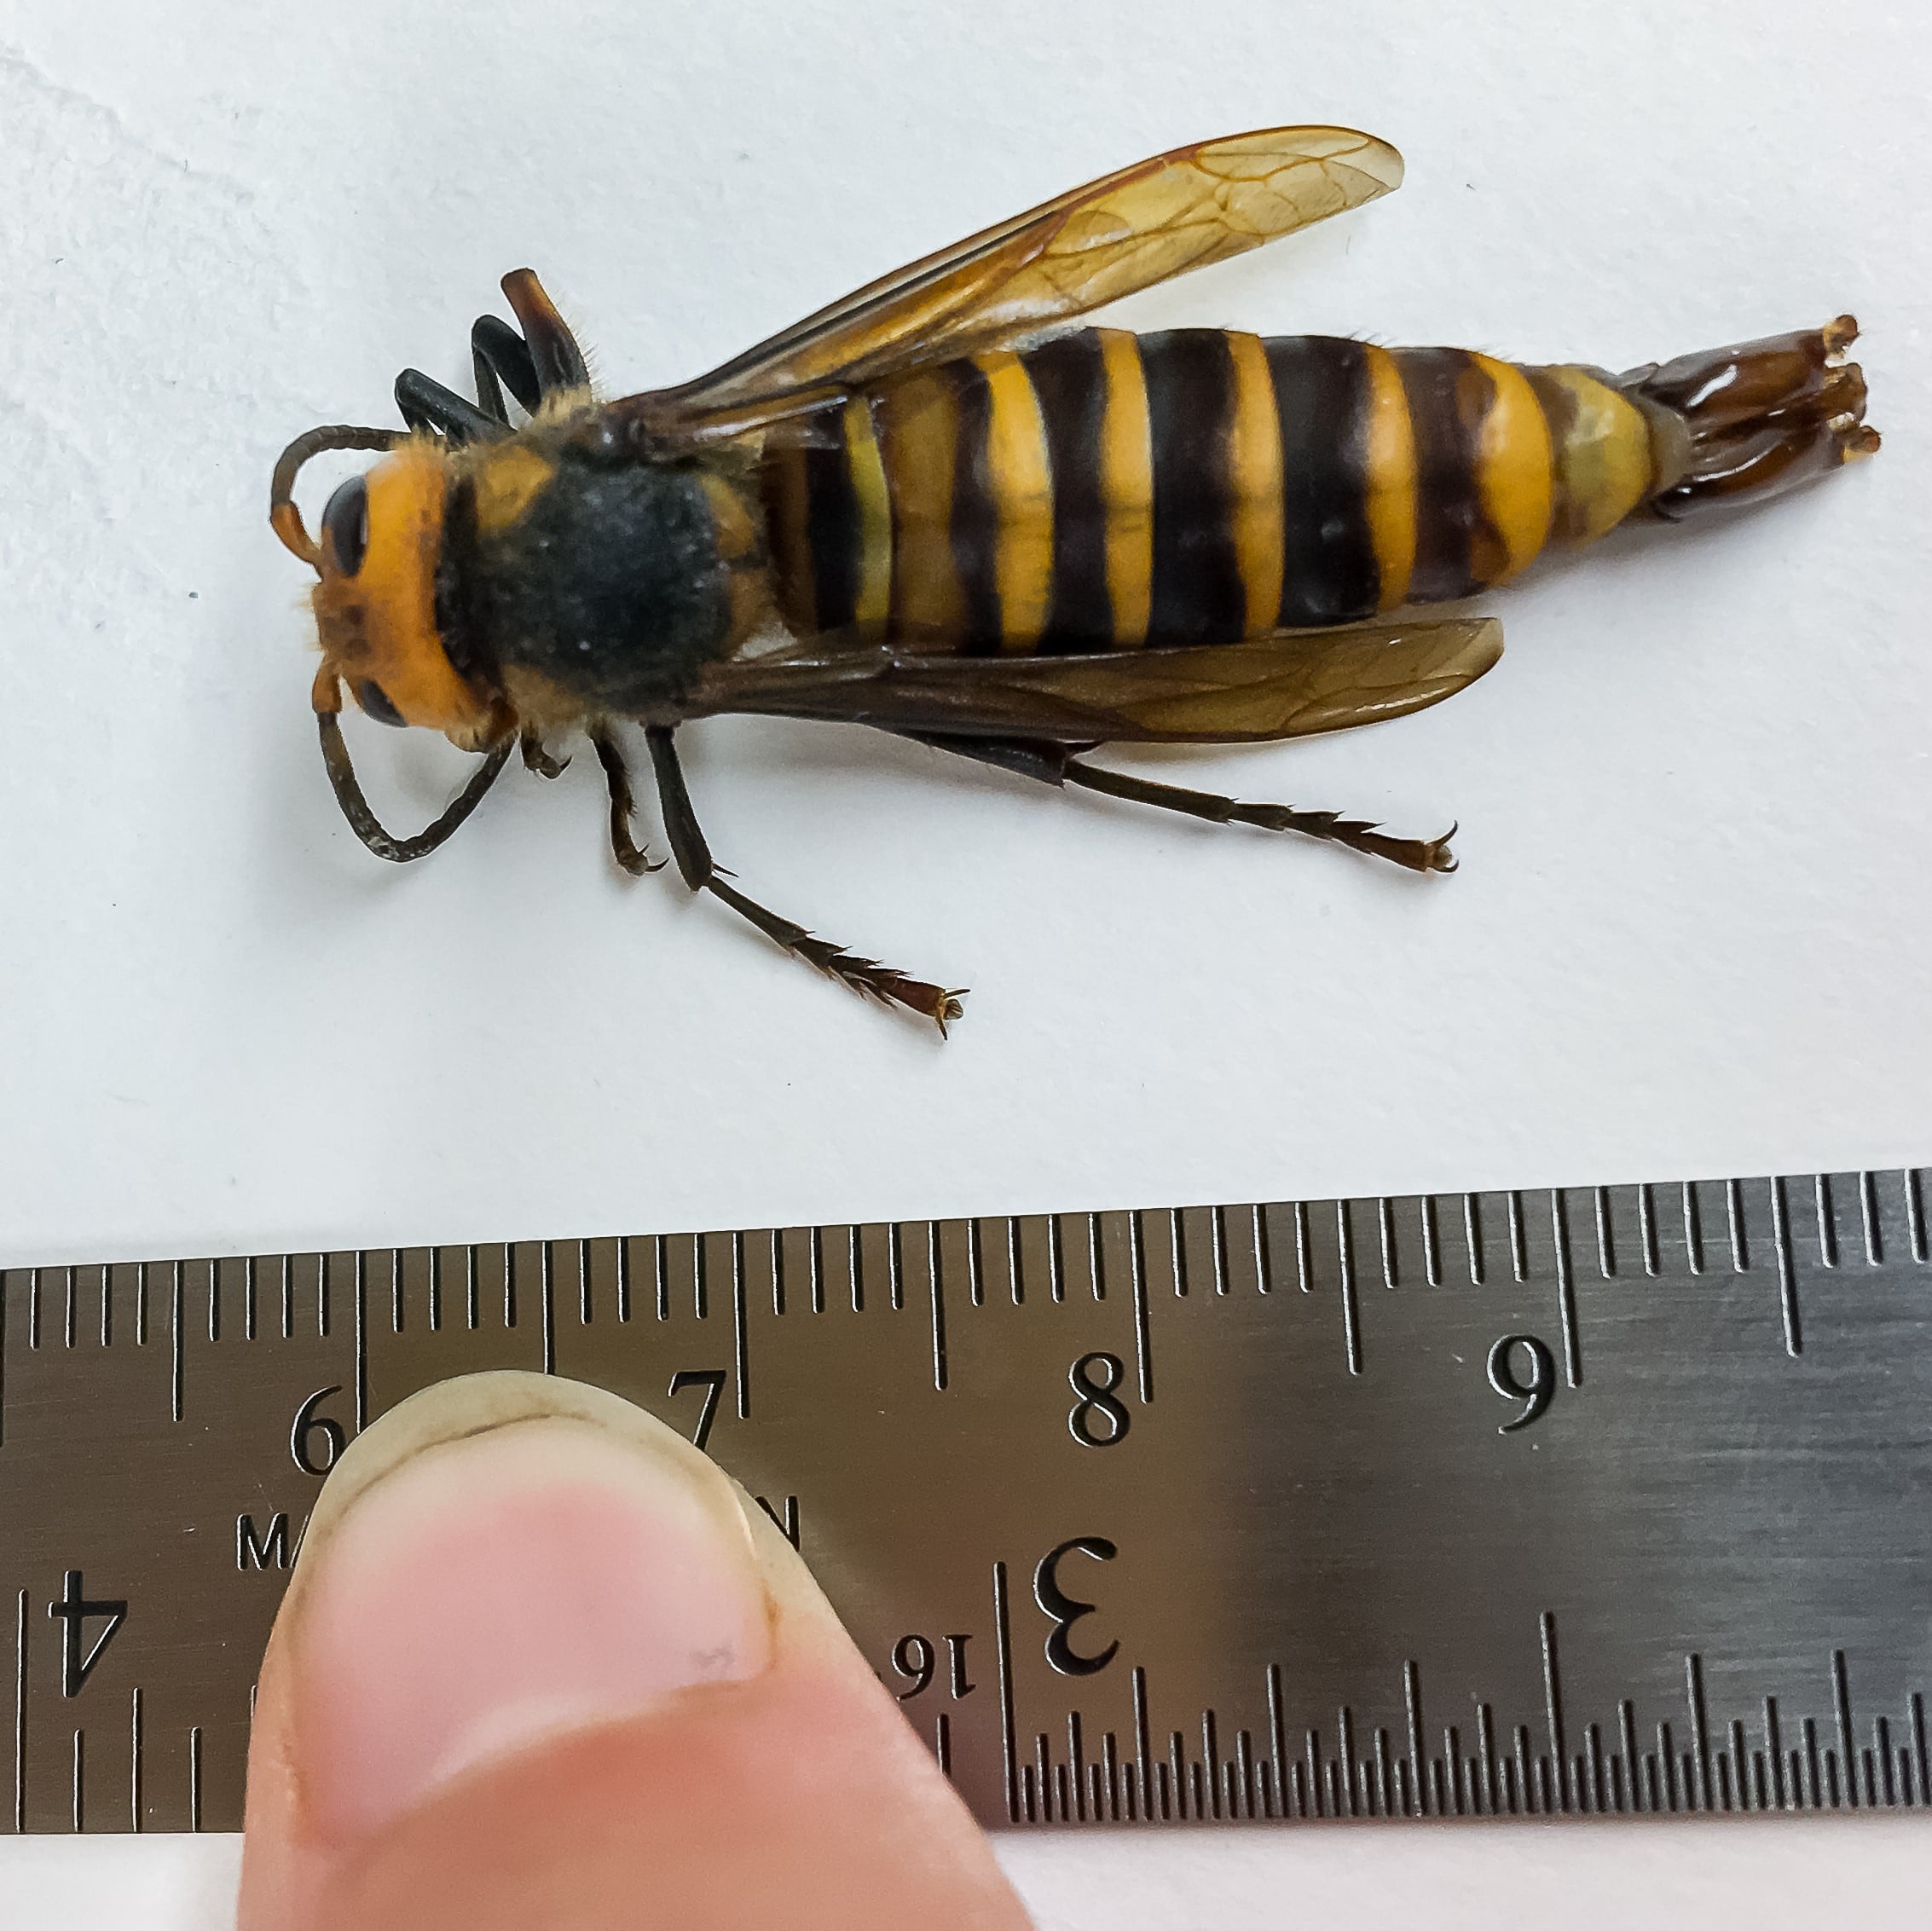 BC, US team up to fight Asian Giant hornet (so-called 'murder hornet') influx